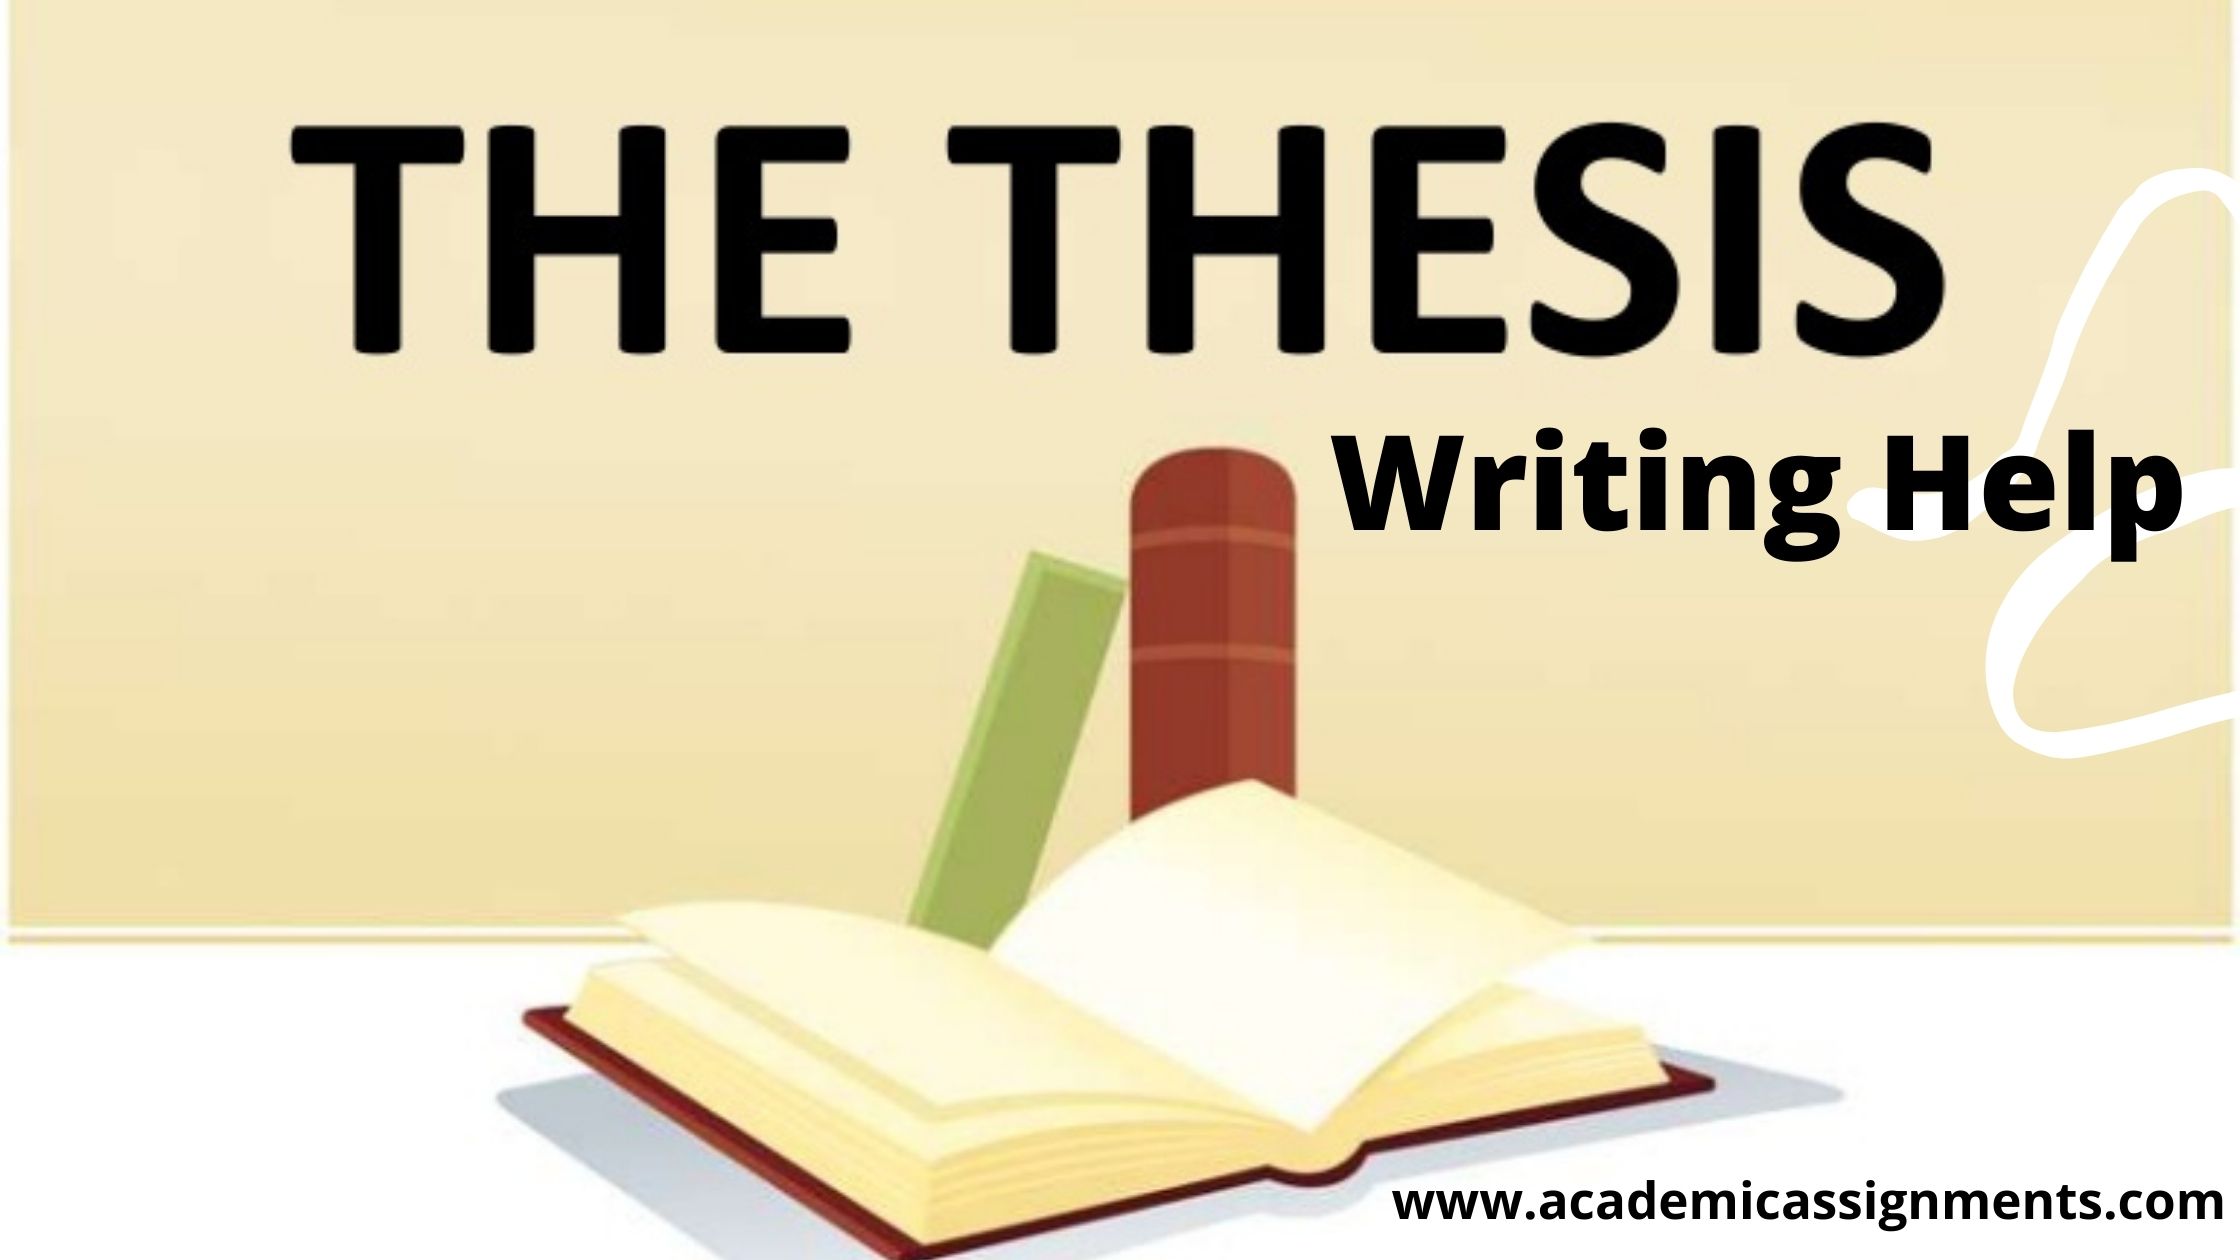 THESIS WRITING HELP